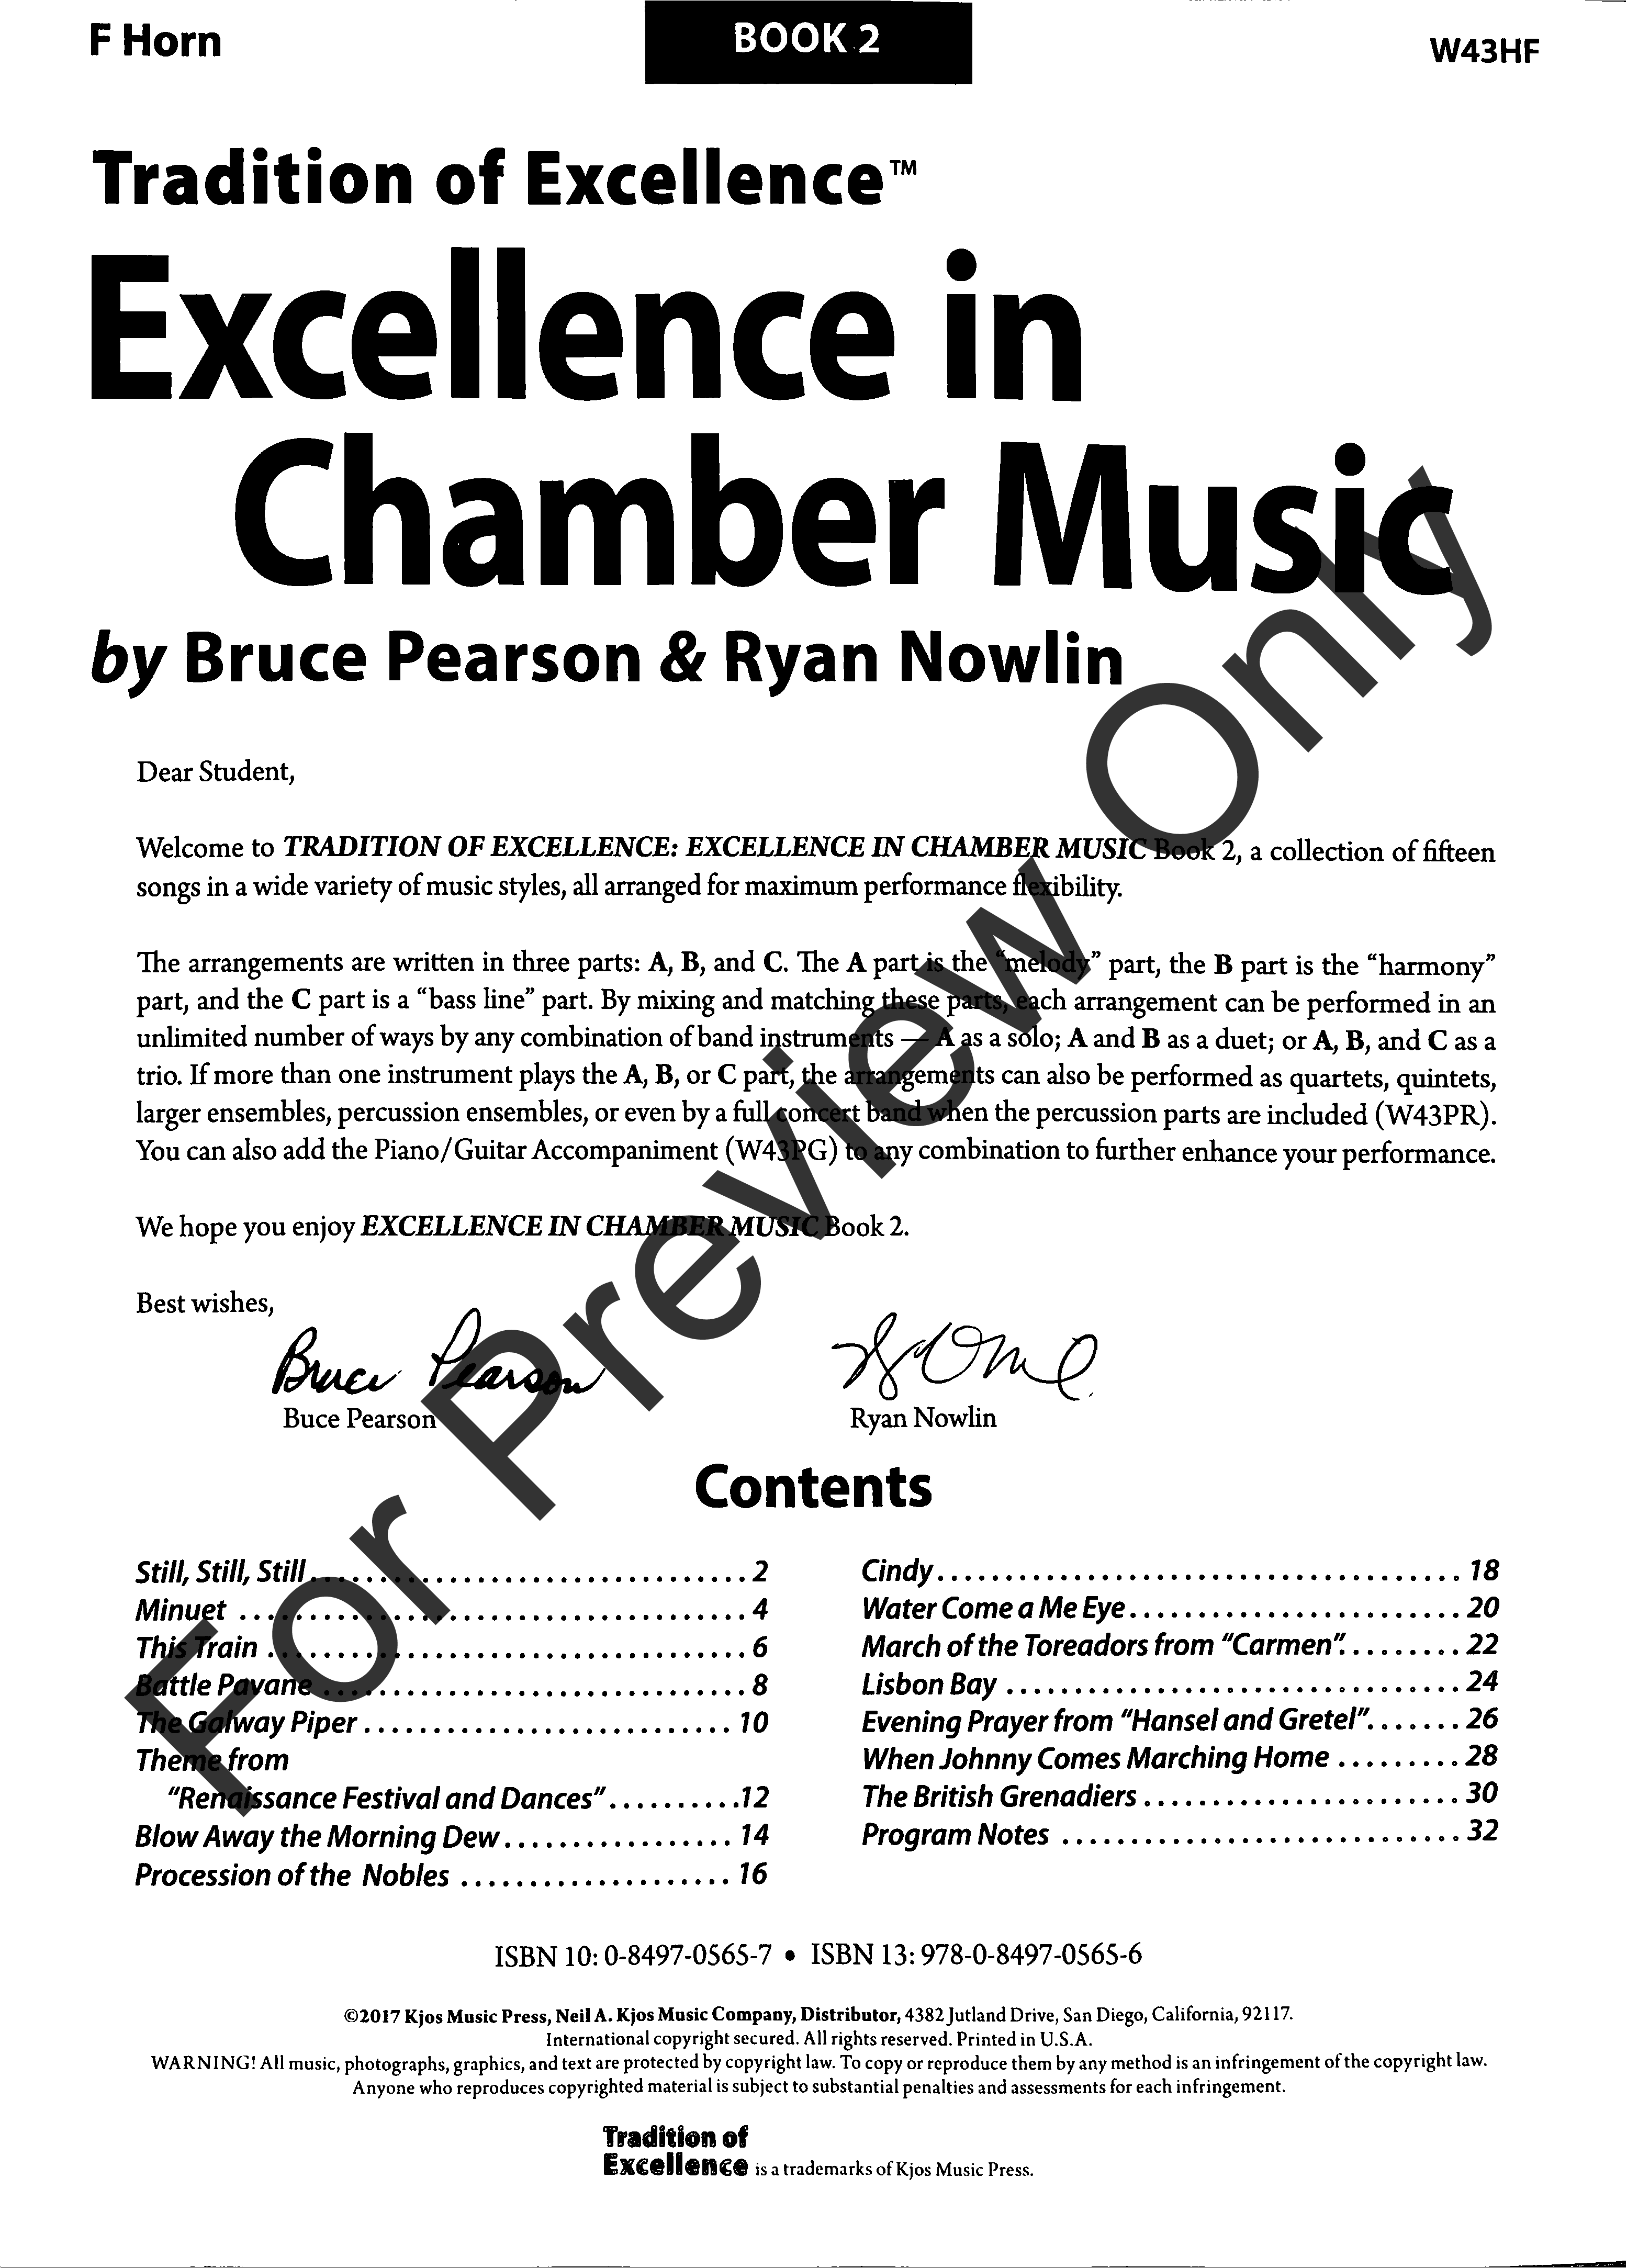 Excellence in Chamber Music #2 French Horn Book